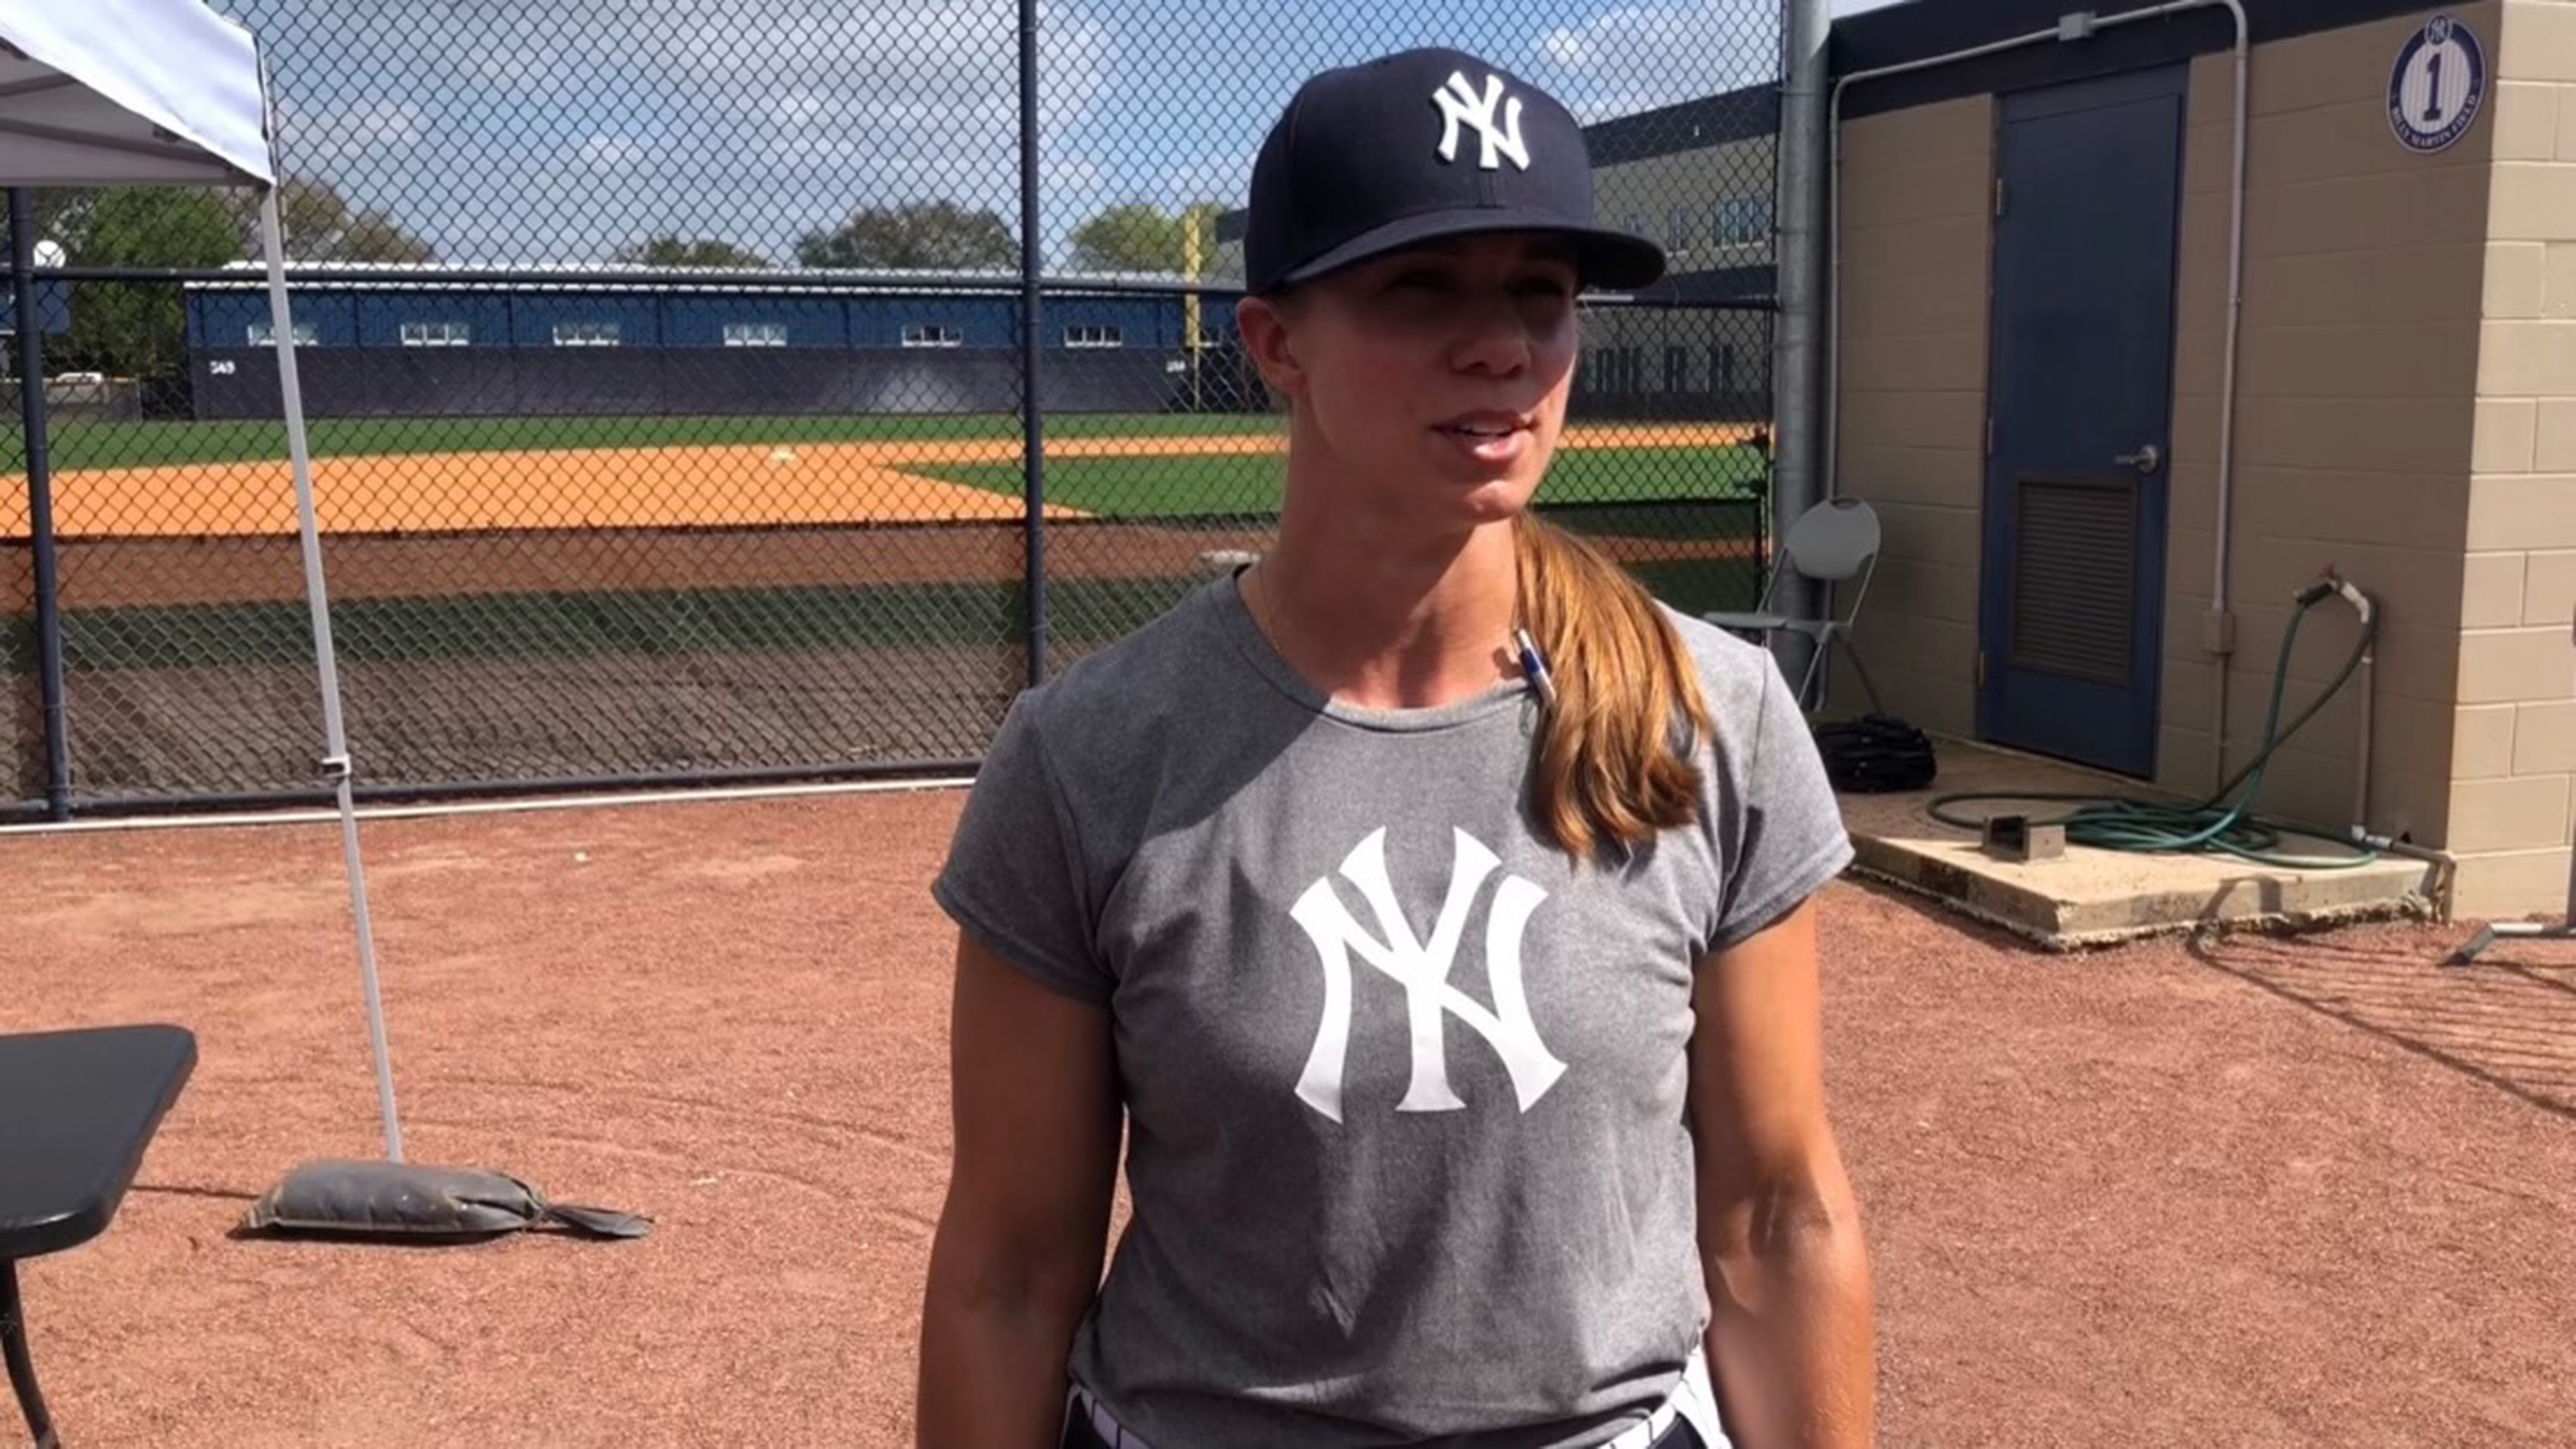 Yankees Minor League Manager Rachel Balkovec Hit in Face by